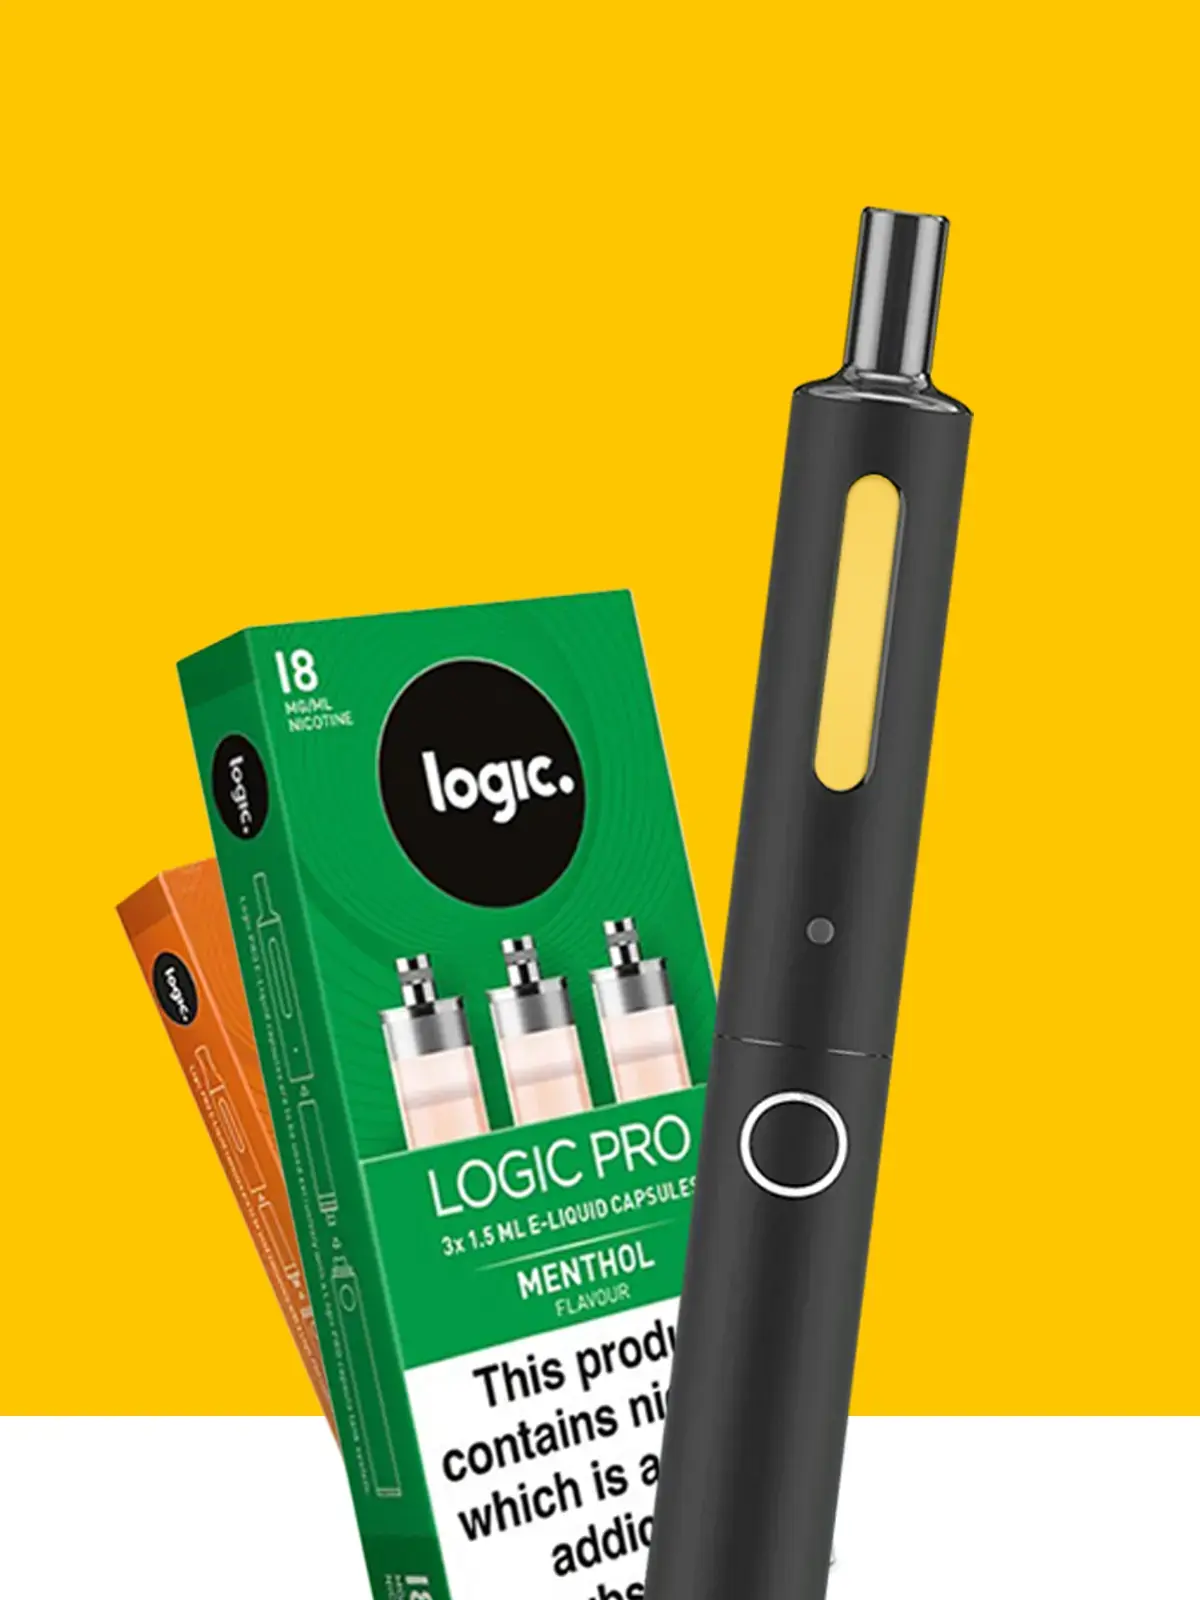 A Logic Pro device with two packs of Logic Pro refill capsules in front of a yellow background